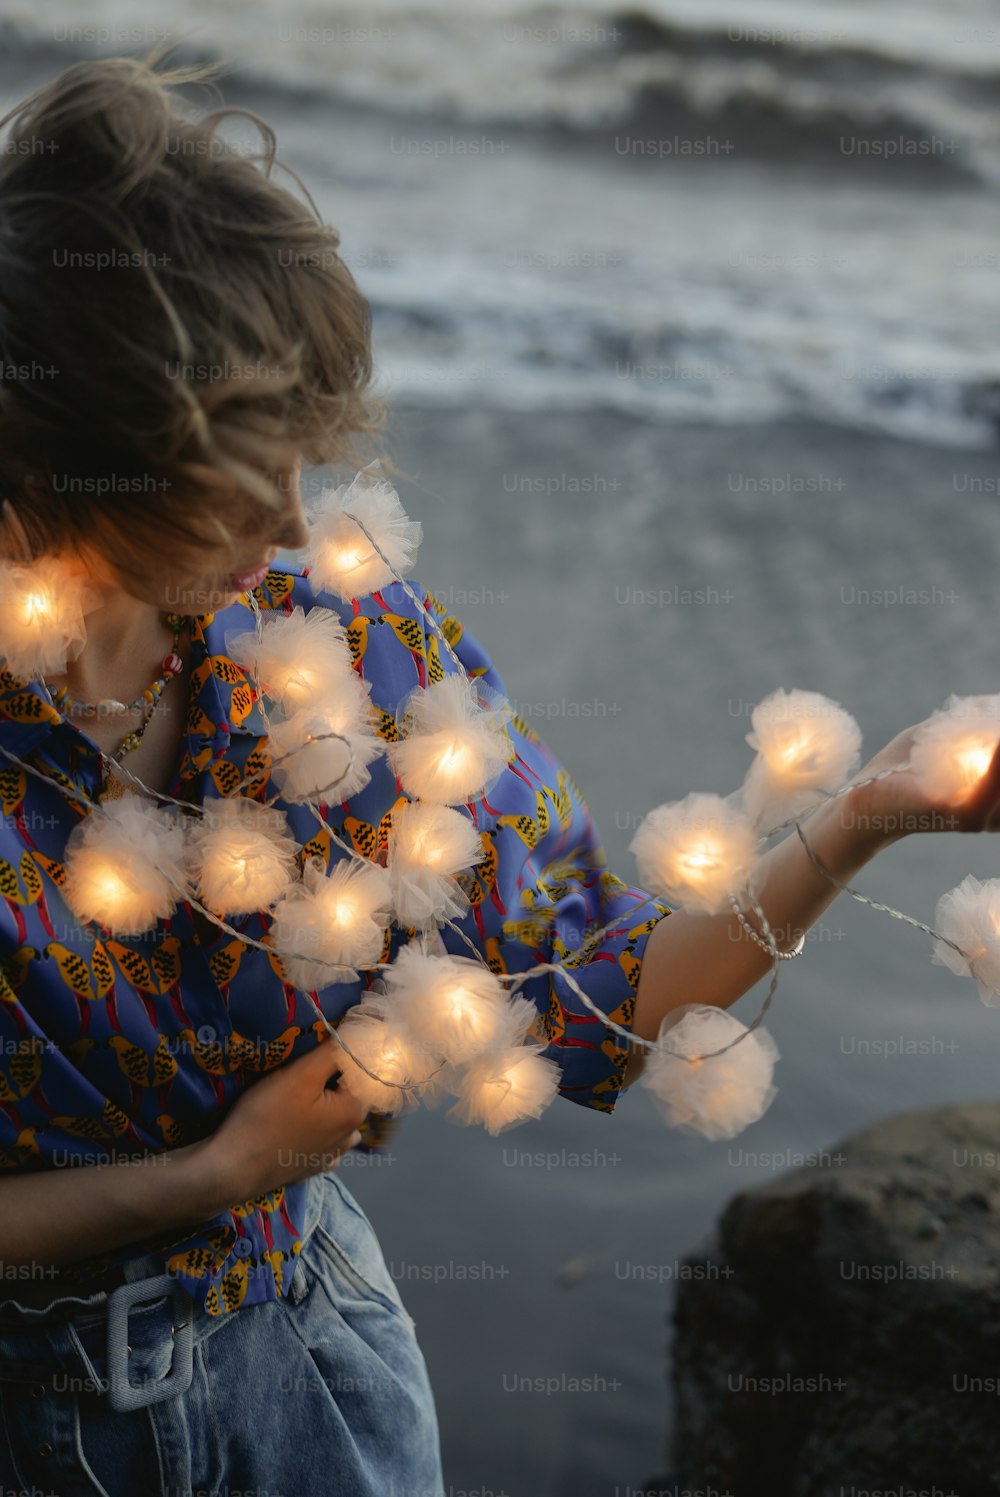 a young girl holding a string of lights near the ocean